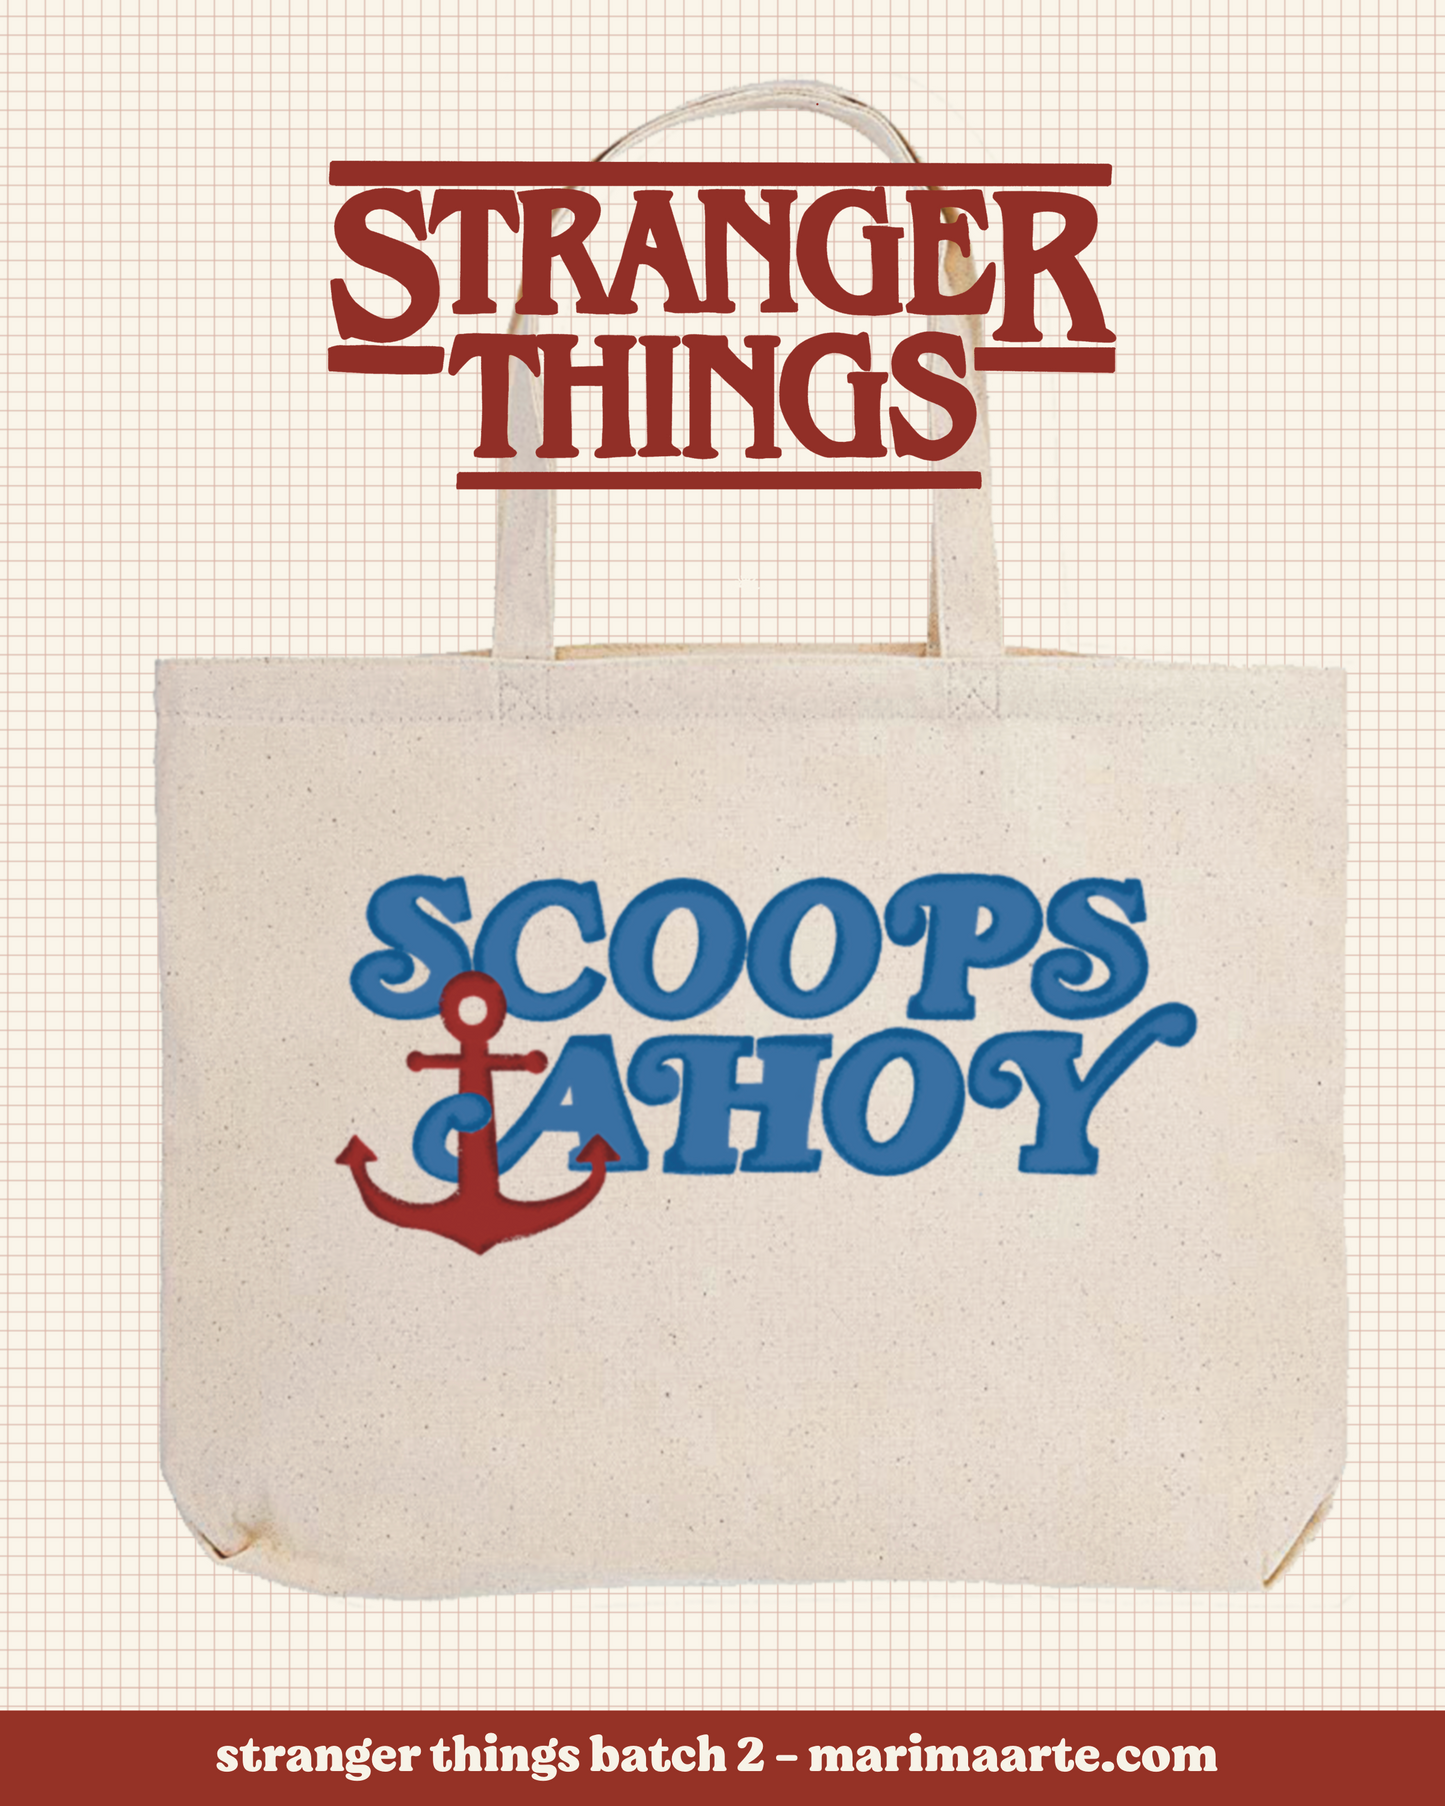 STRANGER THINGS SCOOPS AHOY LARGE TOTE BAG